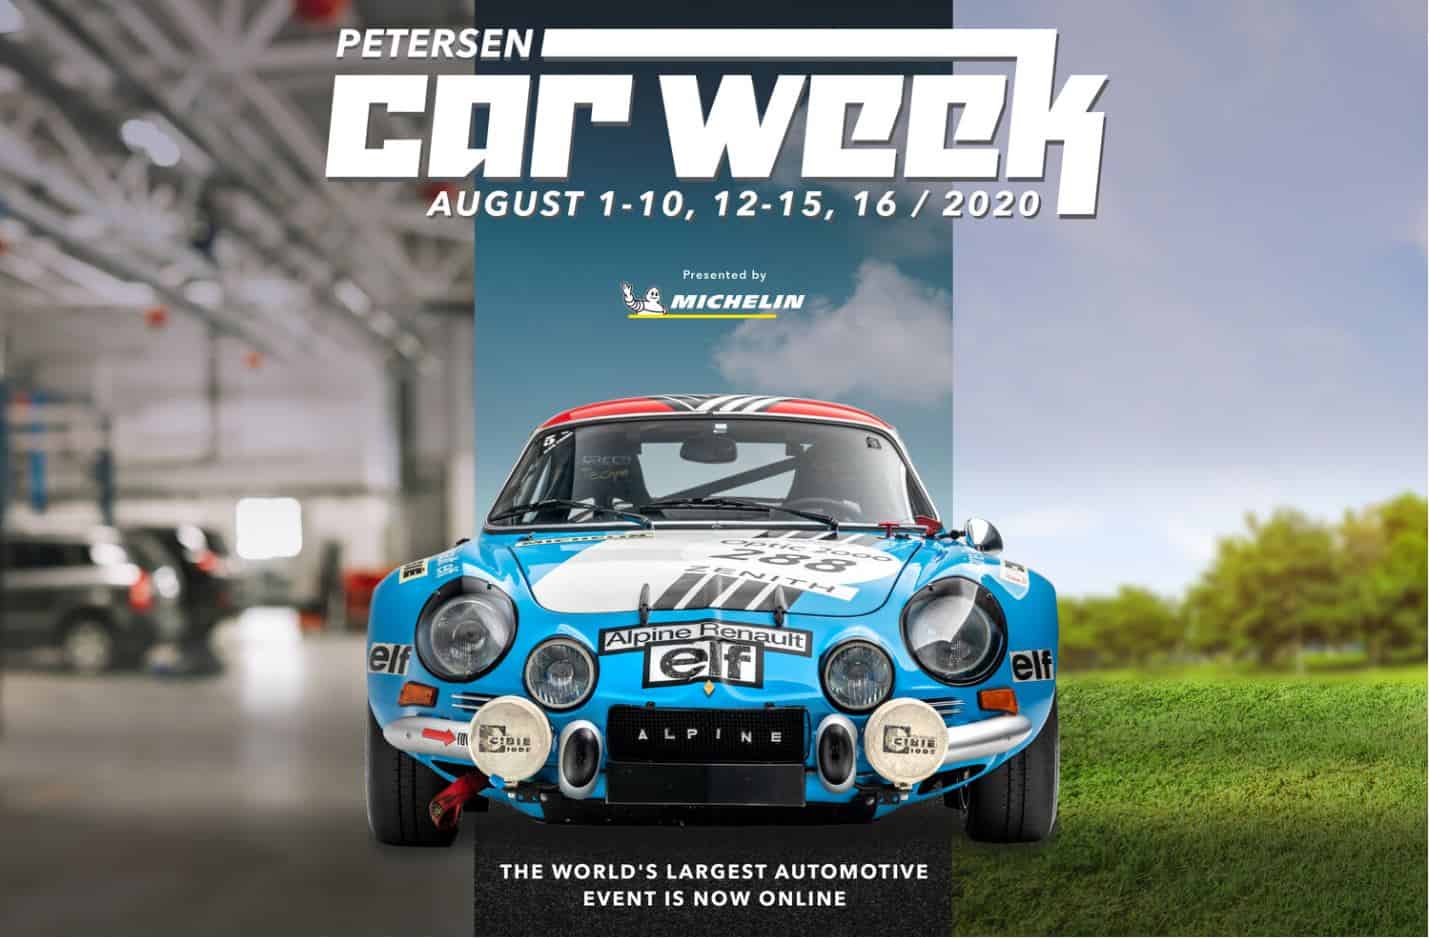 Nguyen, ClassicCars.com&#8217;s Nguyen to be judge during Petersen Car Week, ClassicCars.com Journal